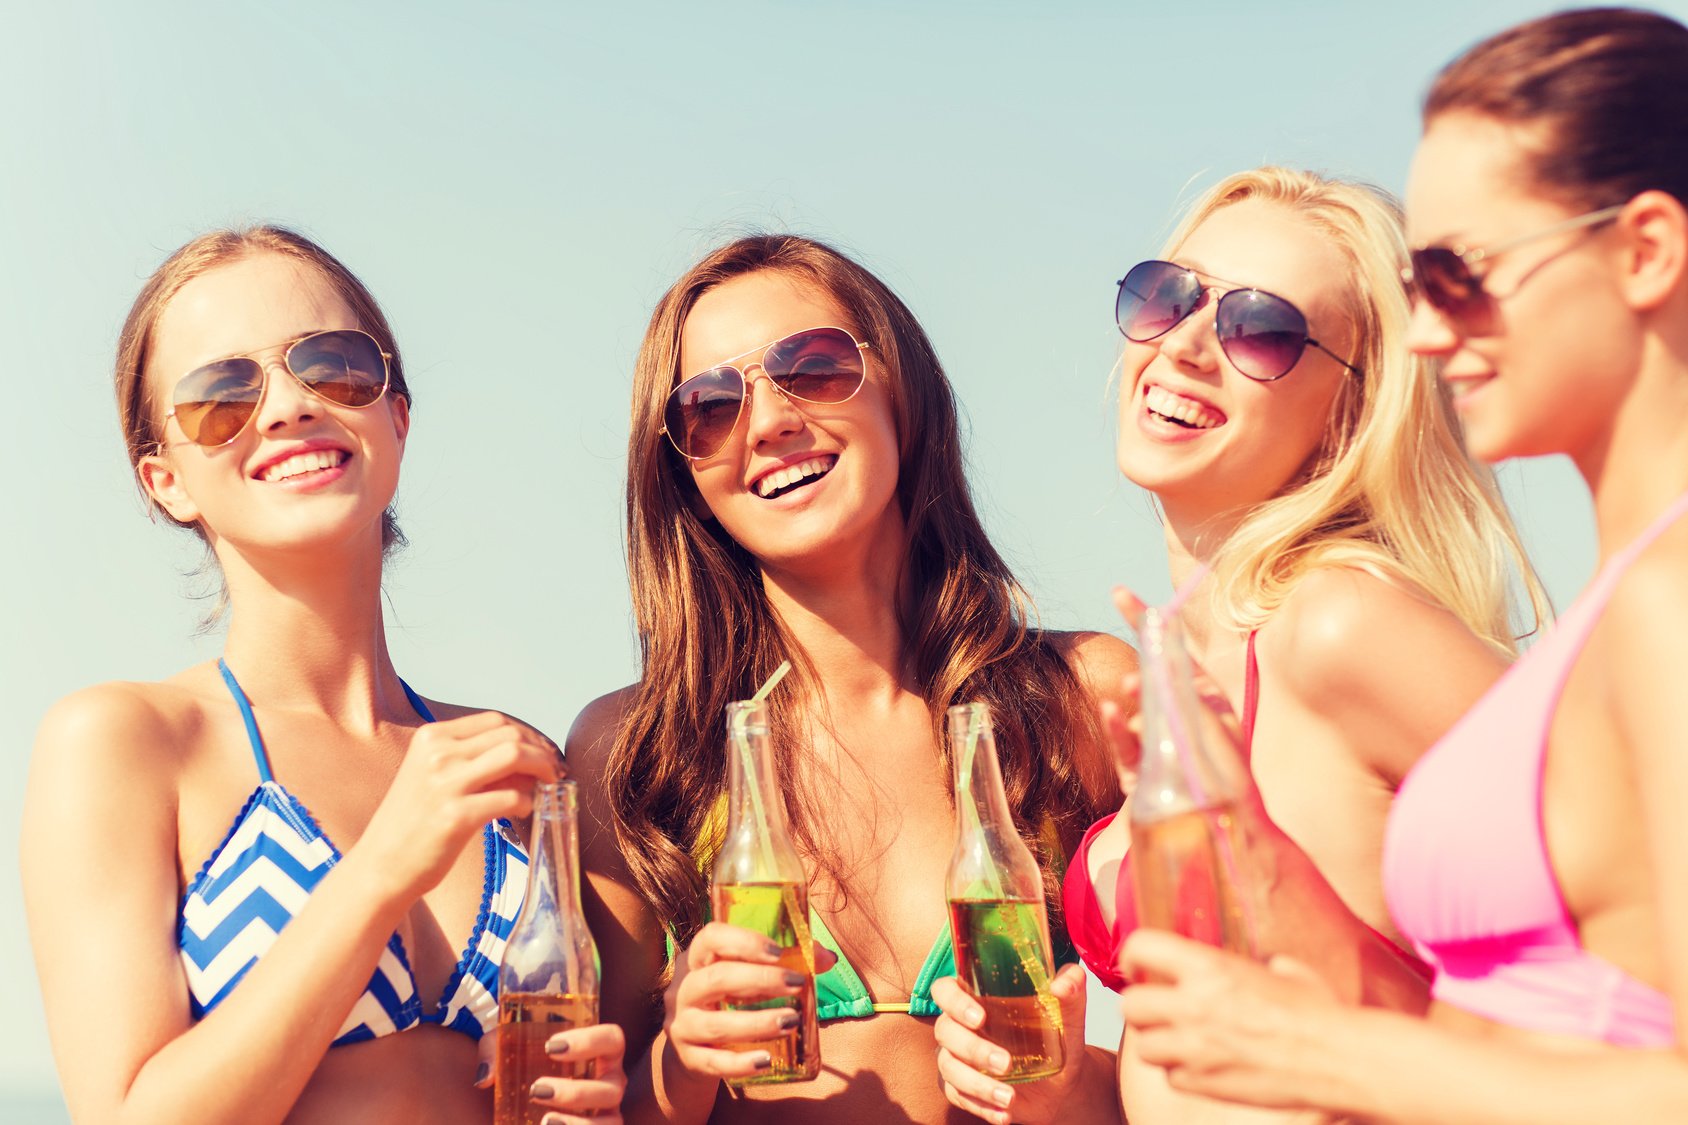 group of smiling young women drinking on beach